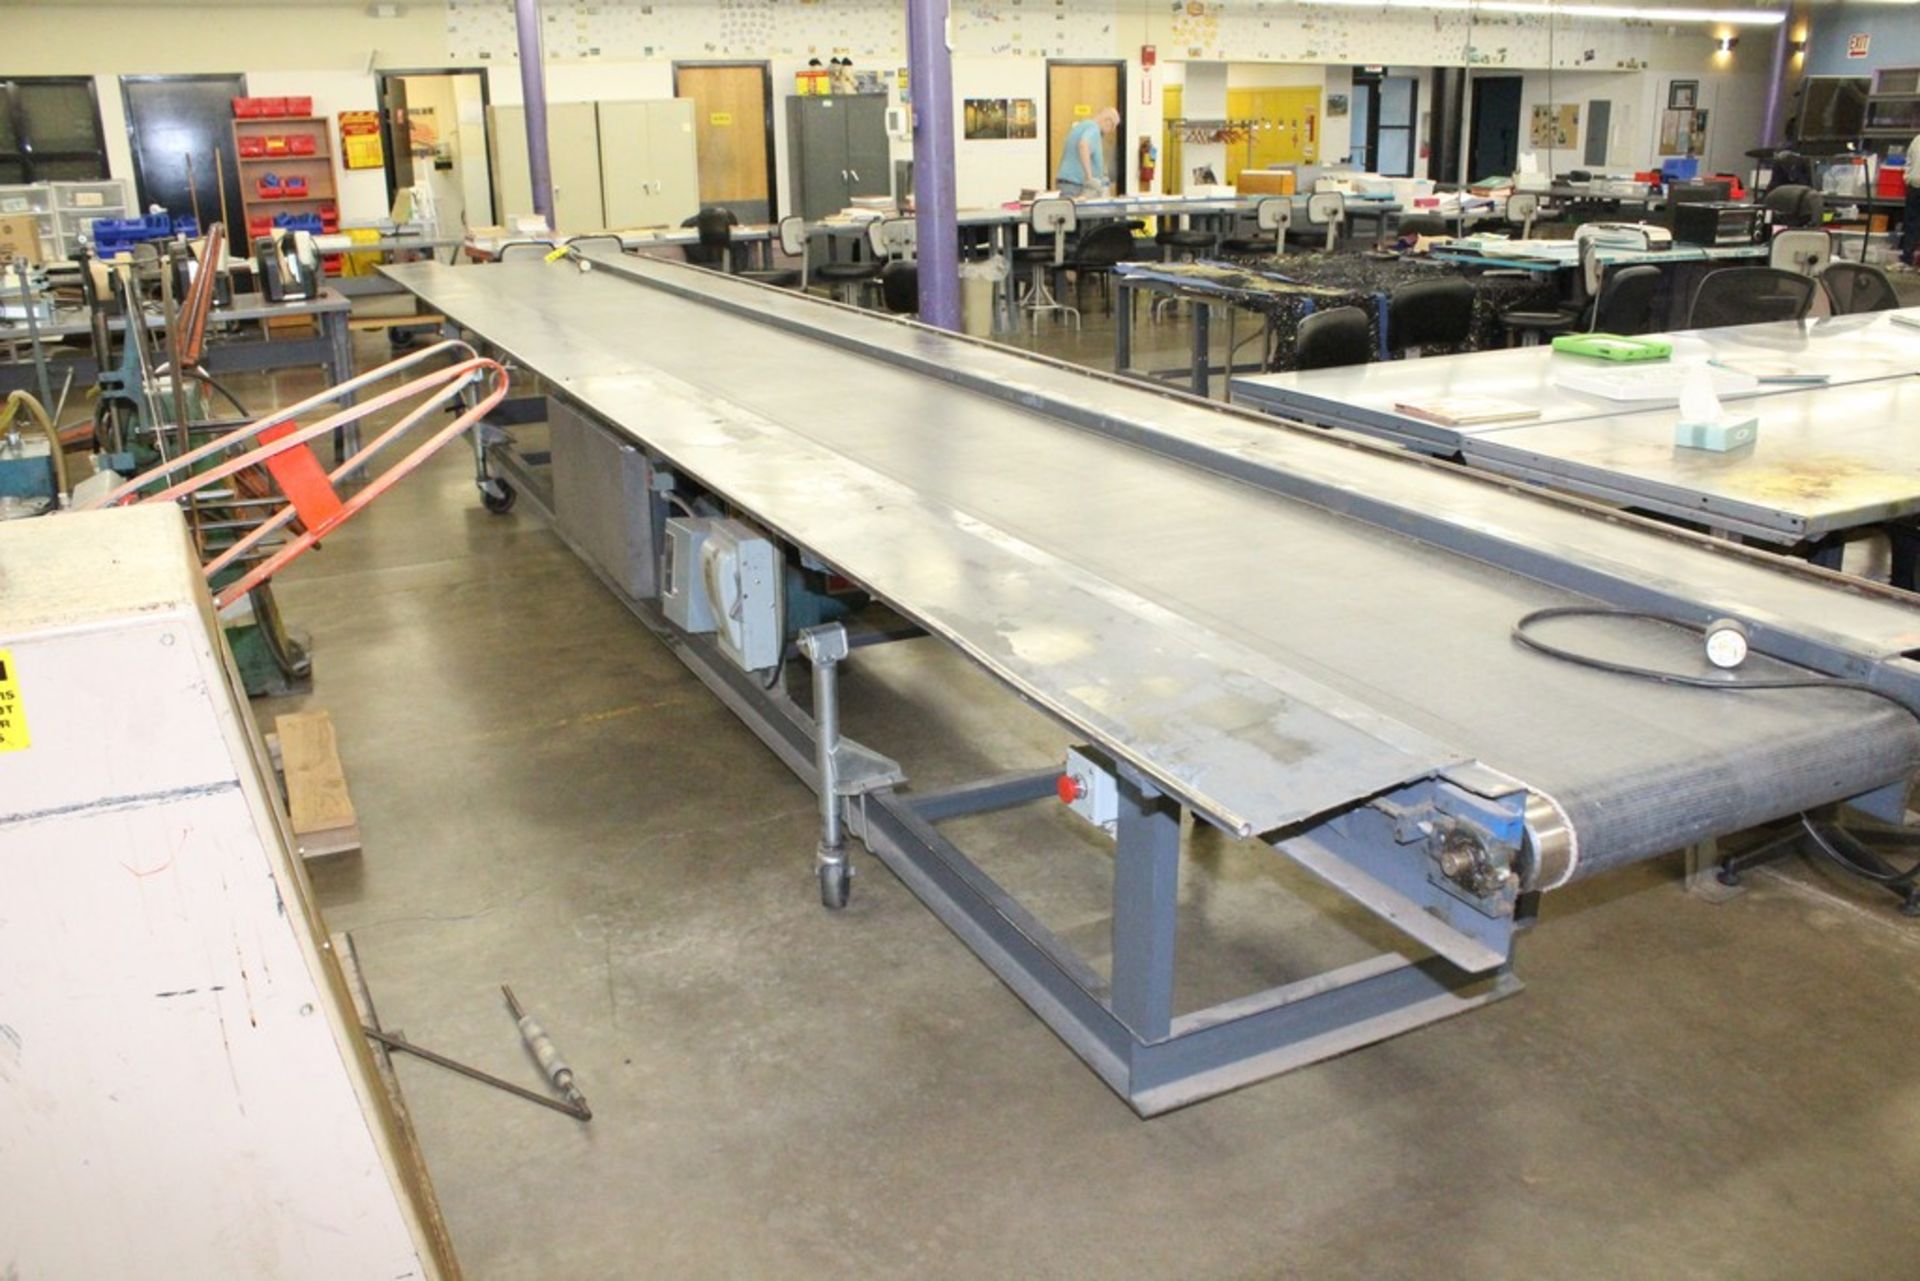 POWERED BELT CONVEYOR, APPROX 23'6" L X 24" W, WITH ALL RELATED MOTORS, STARTERS, SWITCHES, ETC.